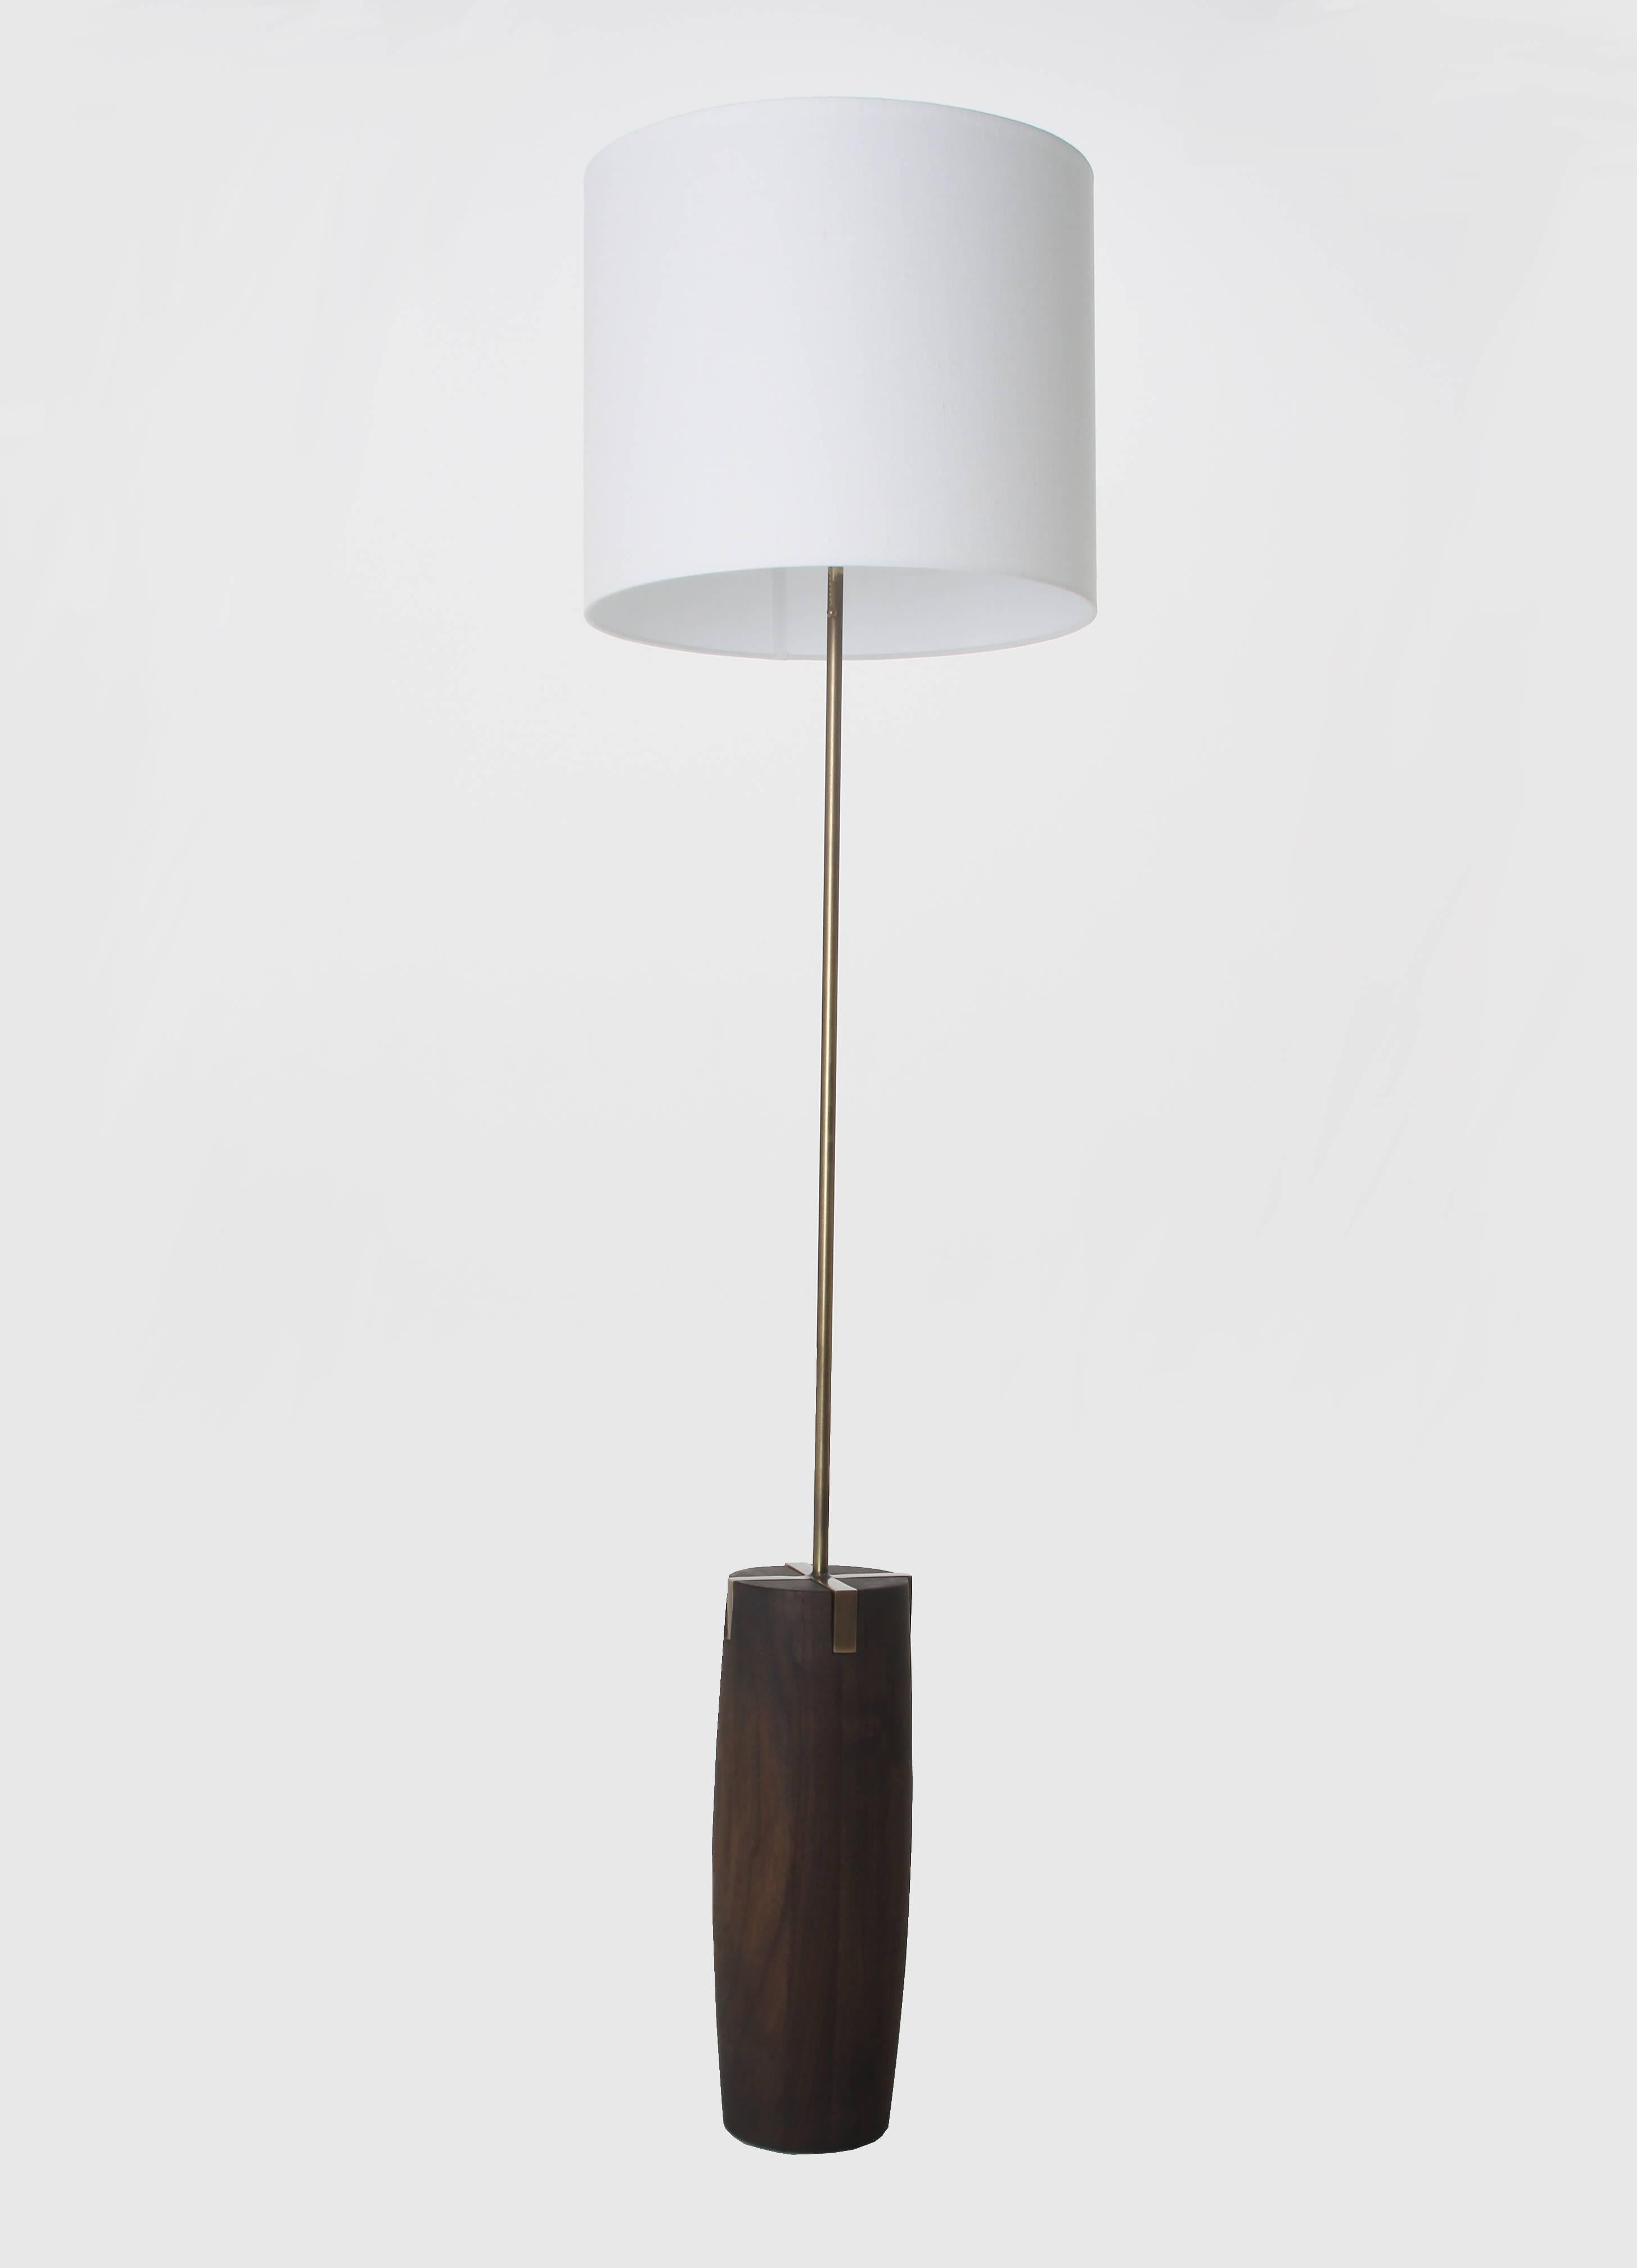 A sculptural, solid wood base lamp with X-frame inset metal detail, available in table or floor lamp sizing. Please inquire about available metal and wood finishes.

Floor lamp available at $2950
Overall dimensions: 63